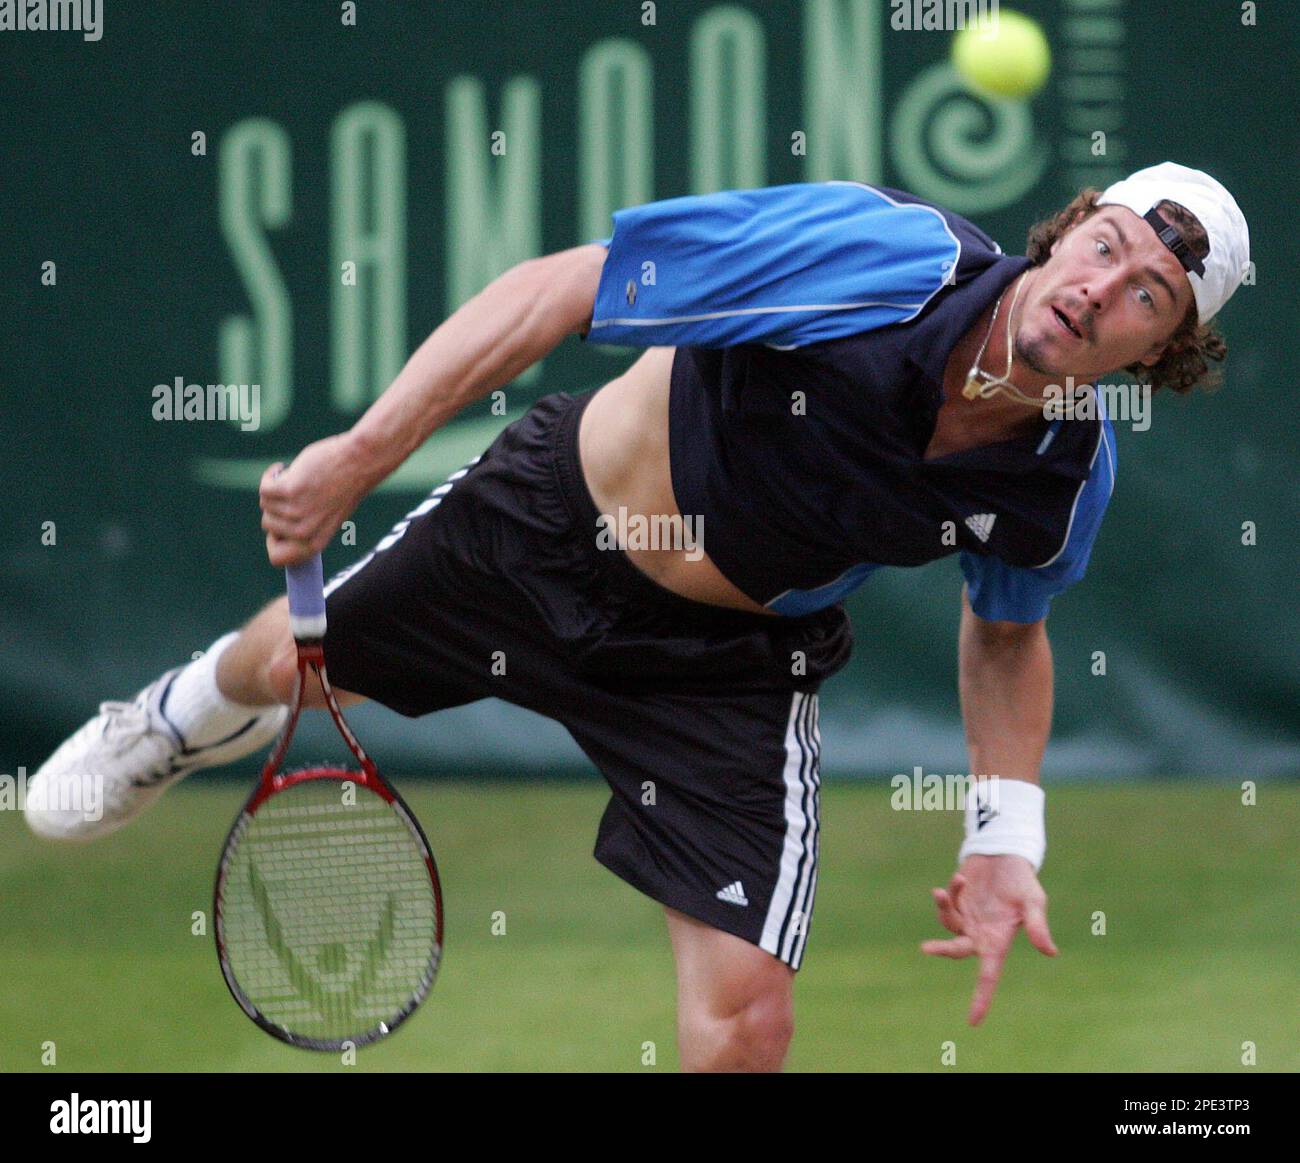 Marat Safin from Russia plays the ball during the final tennis match against Roger Federer from Switzerland at the ATP Gerry Weber Open in Halle, western Germany, Sunday, June 12, 2005